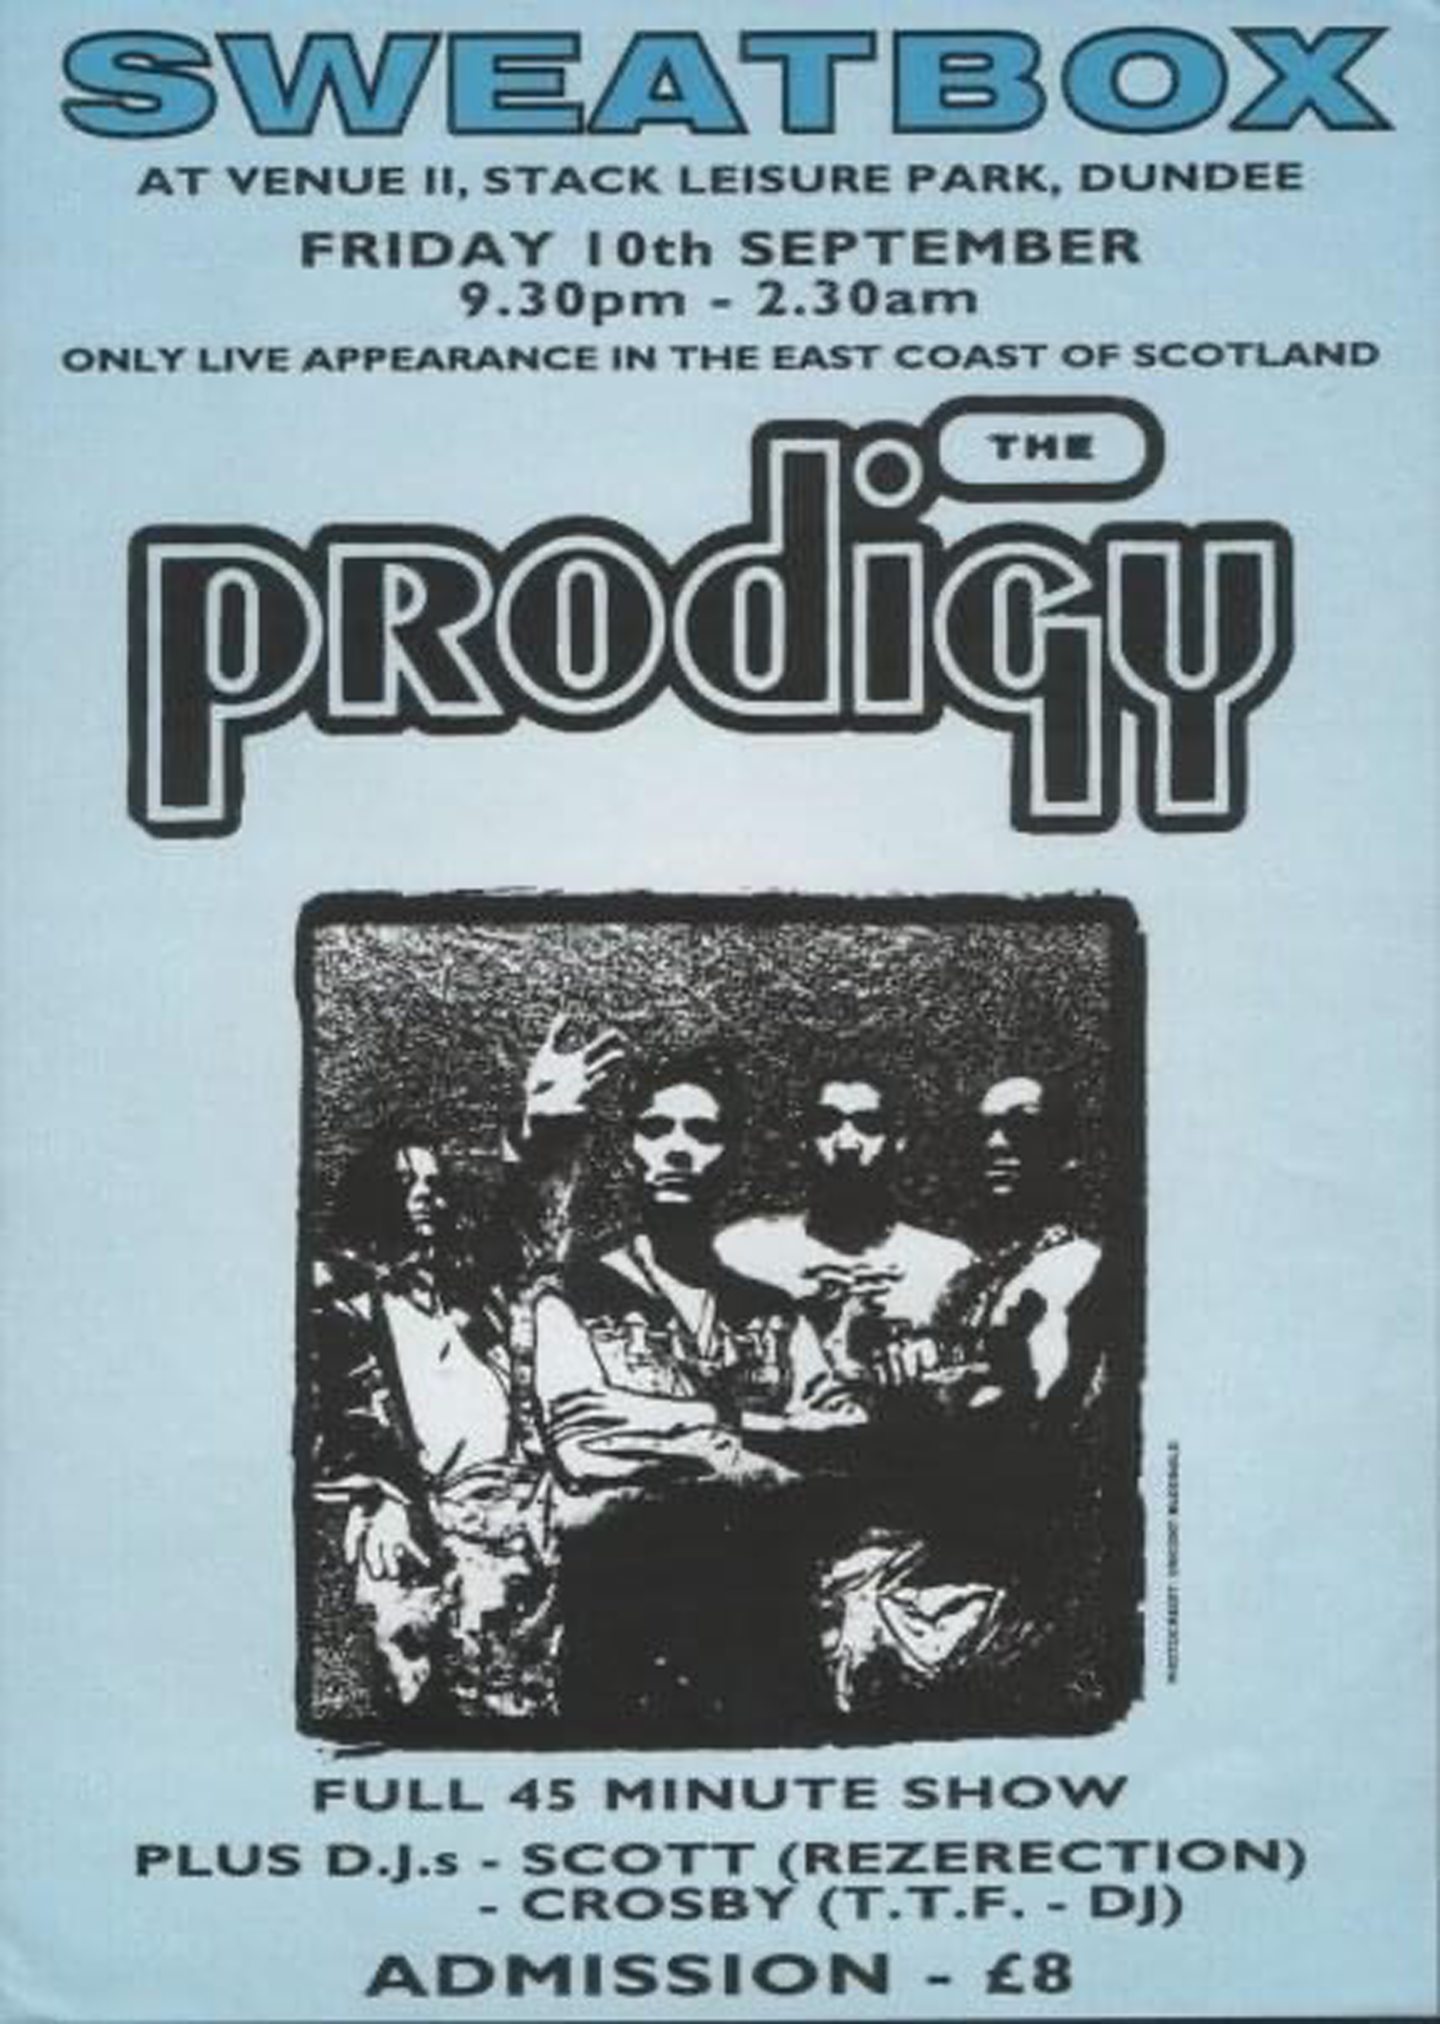 A gig poster. The Prodigy performed in the early hours September 11 1993 at the Sweatbox event. Image: Supplied.